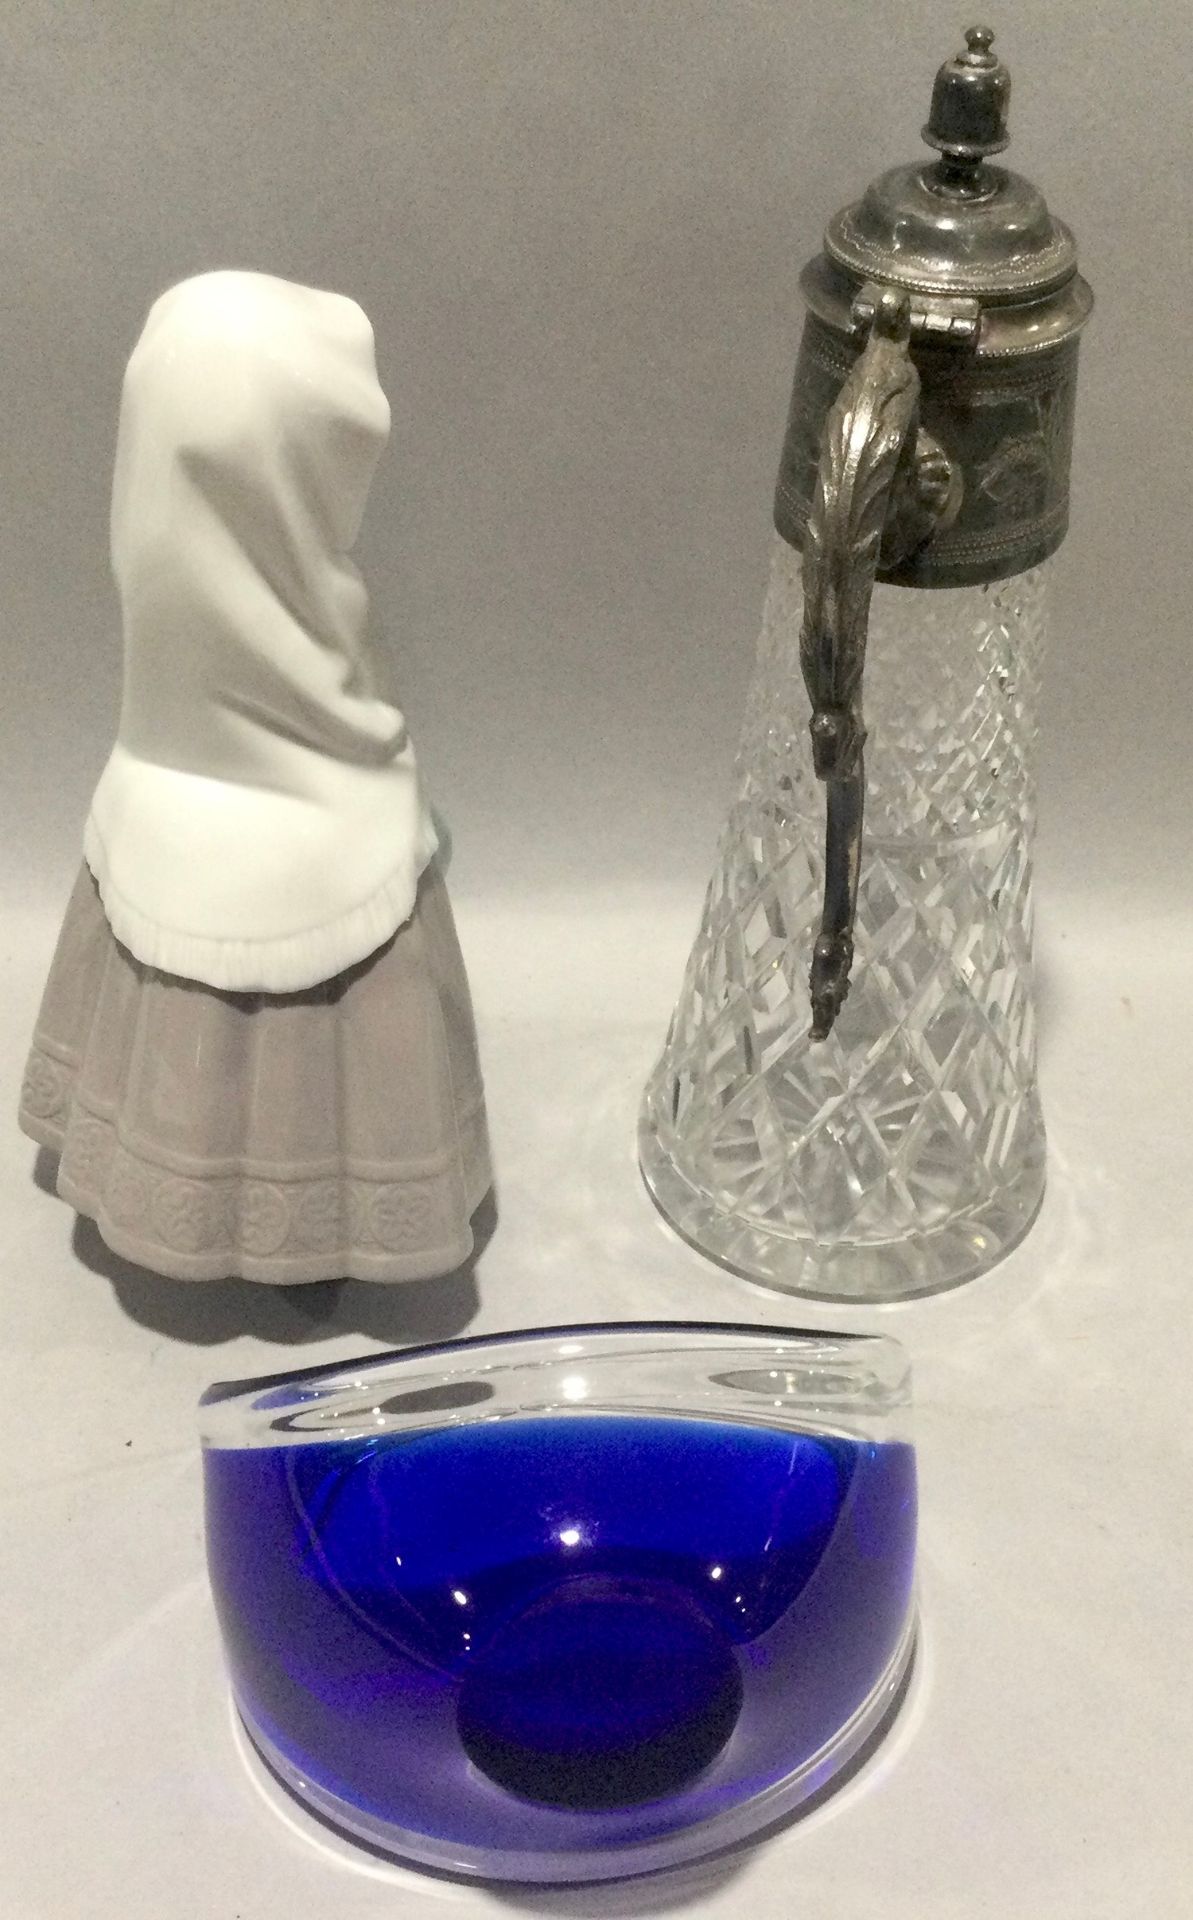 Nao figurine of a girl 26cm tall together with a blue glassware sweet bowl and crystal glass - Image 2 of 3